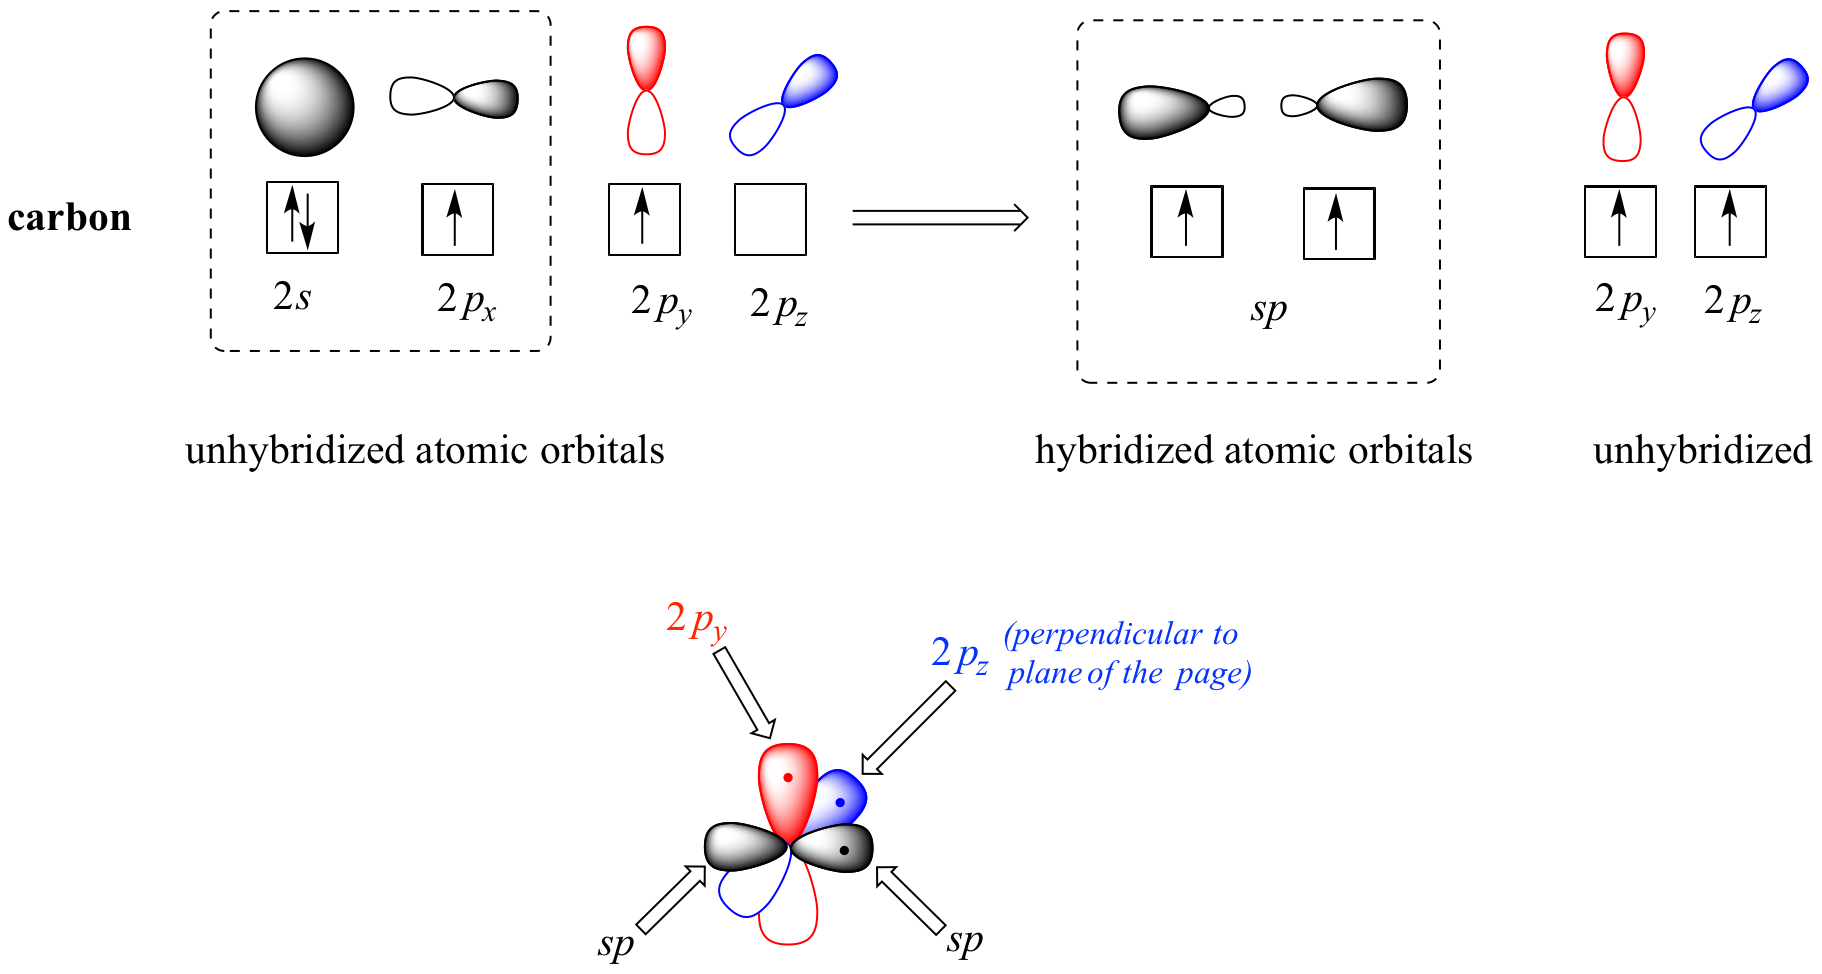 The carbon in ethyne has a full 2 s orbital and two unpaired electrons in the 2 p orbital. After hybridizing, the carbon has two unpaired electrons in the sp orbital and two unpaired electrons in the unhybridized 2 p orbital. 